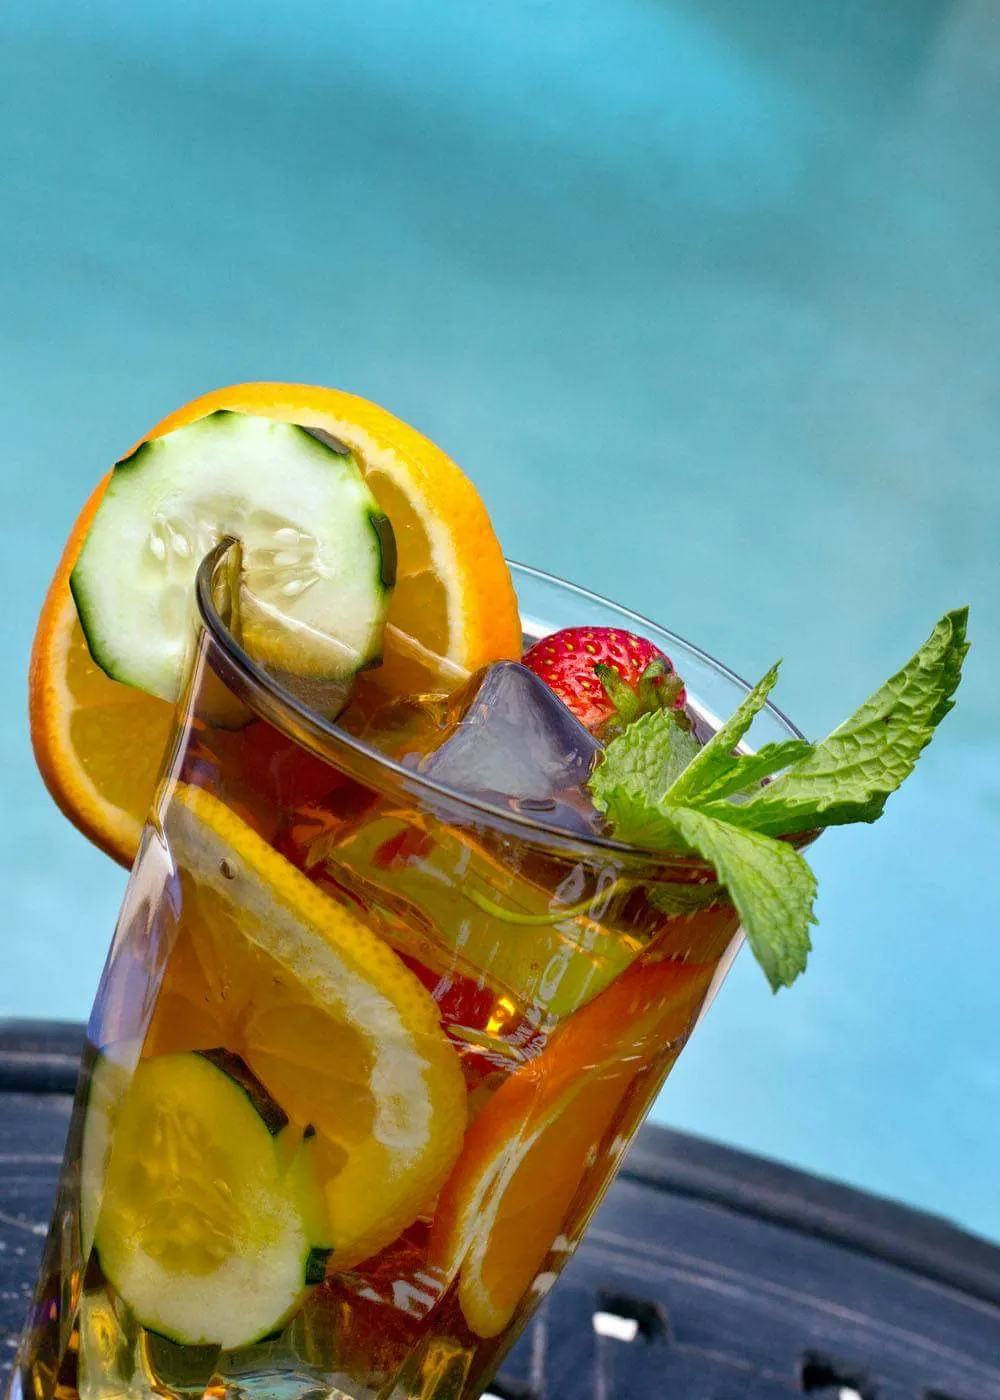 Lemon-Bourbon Iced Tea Cocktails are so refreshing for the summer season. Sit back, relax, and enjoy the sipping!